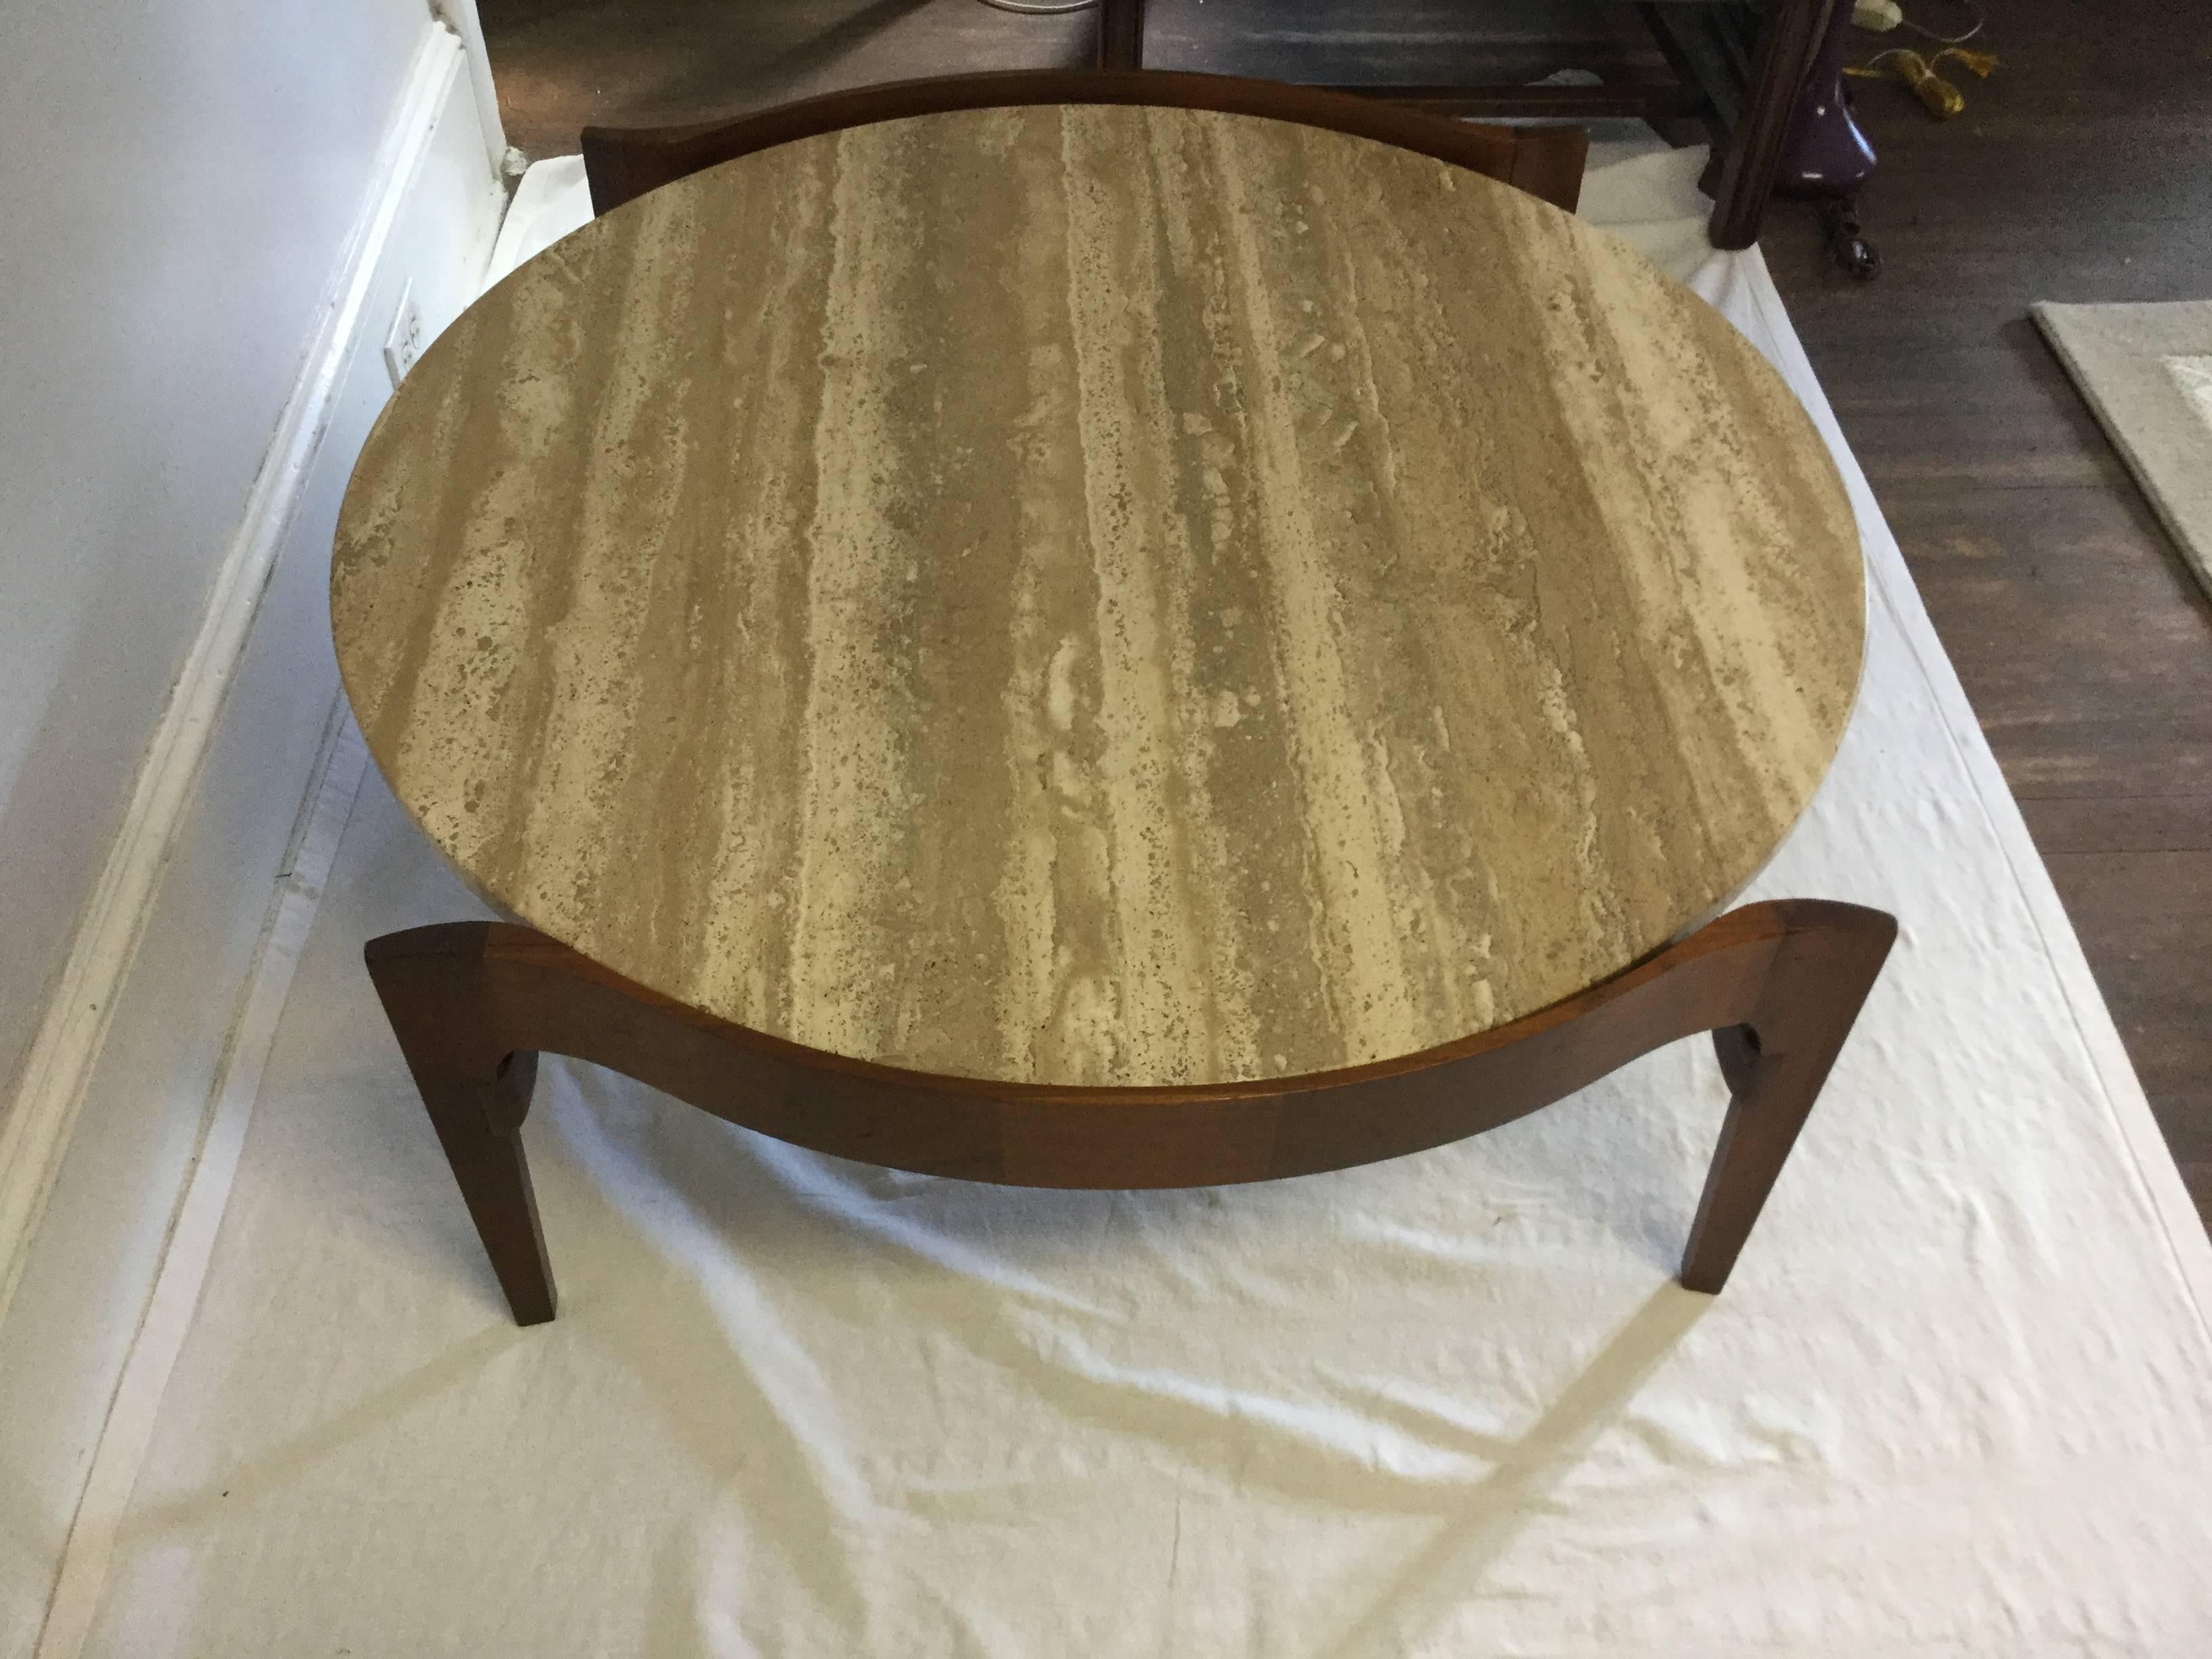 Beautiful mid century modern table by Berths Shaefer for Gordon International.
A Lovery round travertine top gently wrapped by a walnut frame.
2 available. 